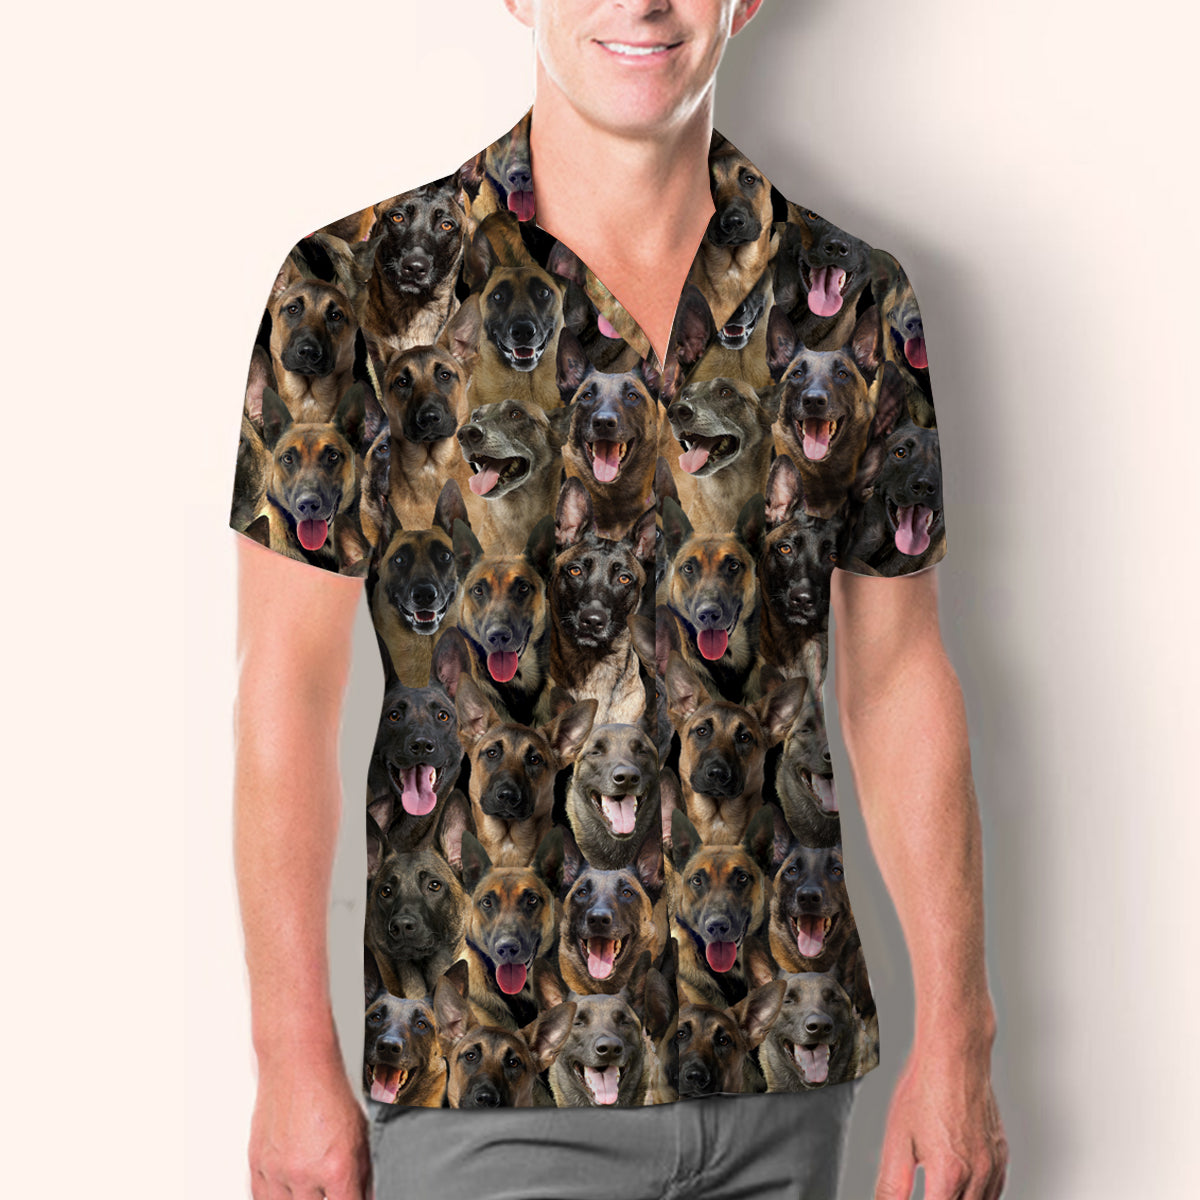 You Will Have A Bunch Of Belgian Malinois - Shirt V1